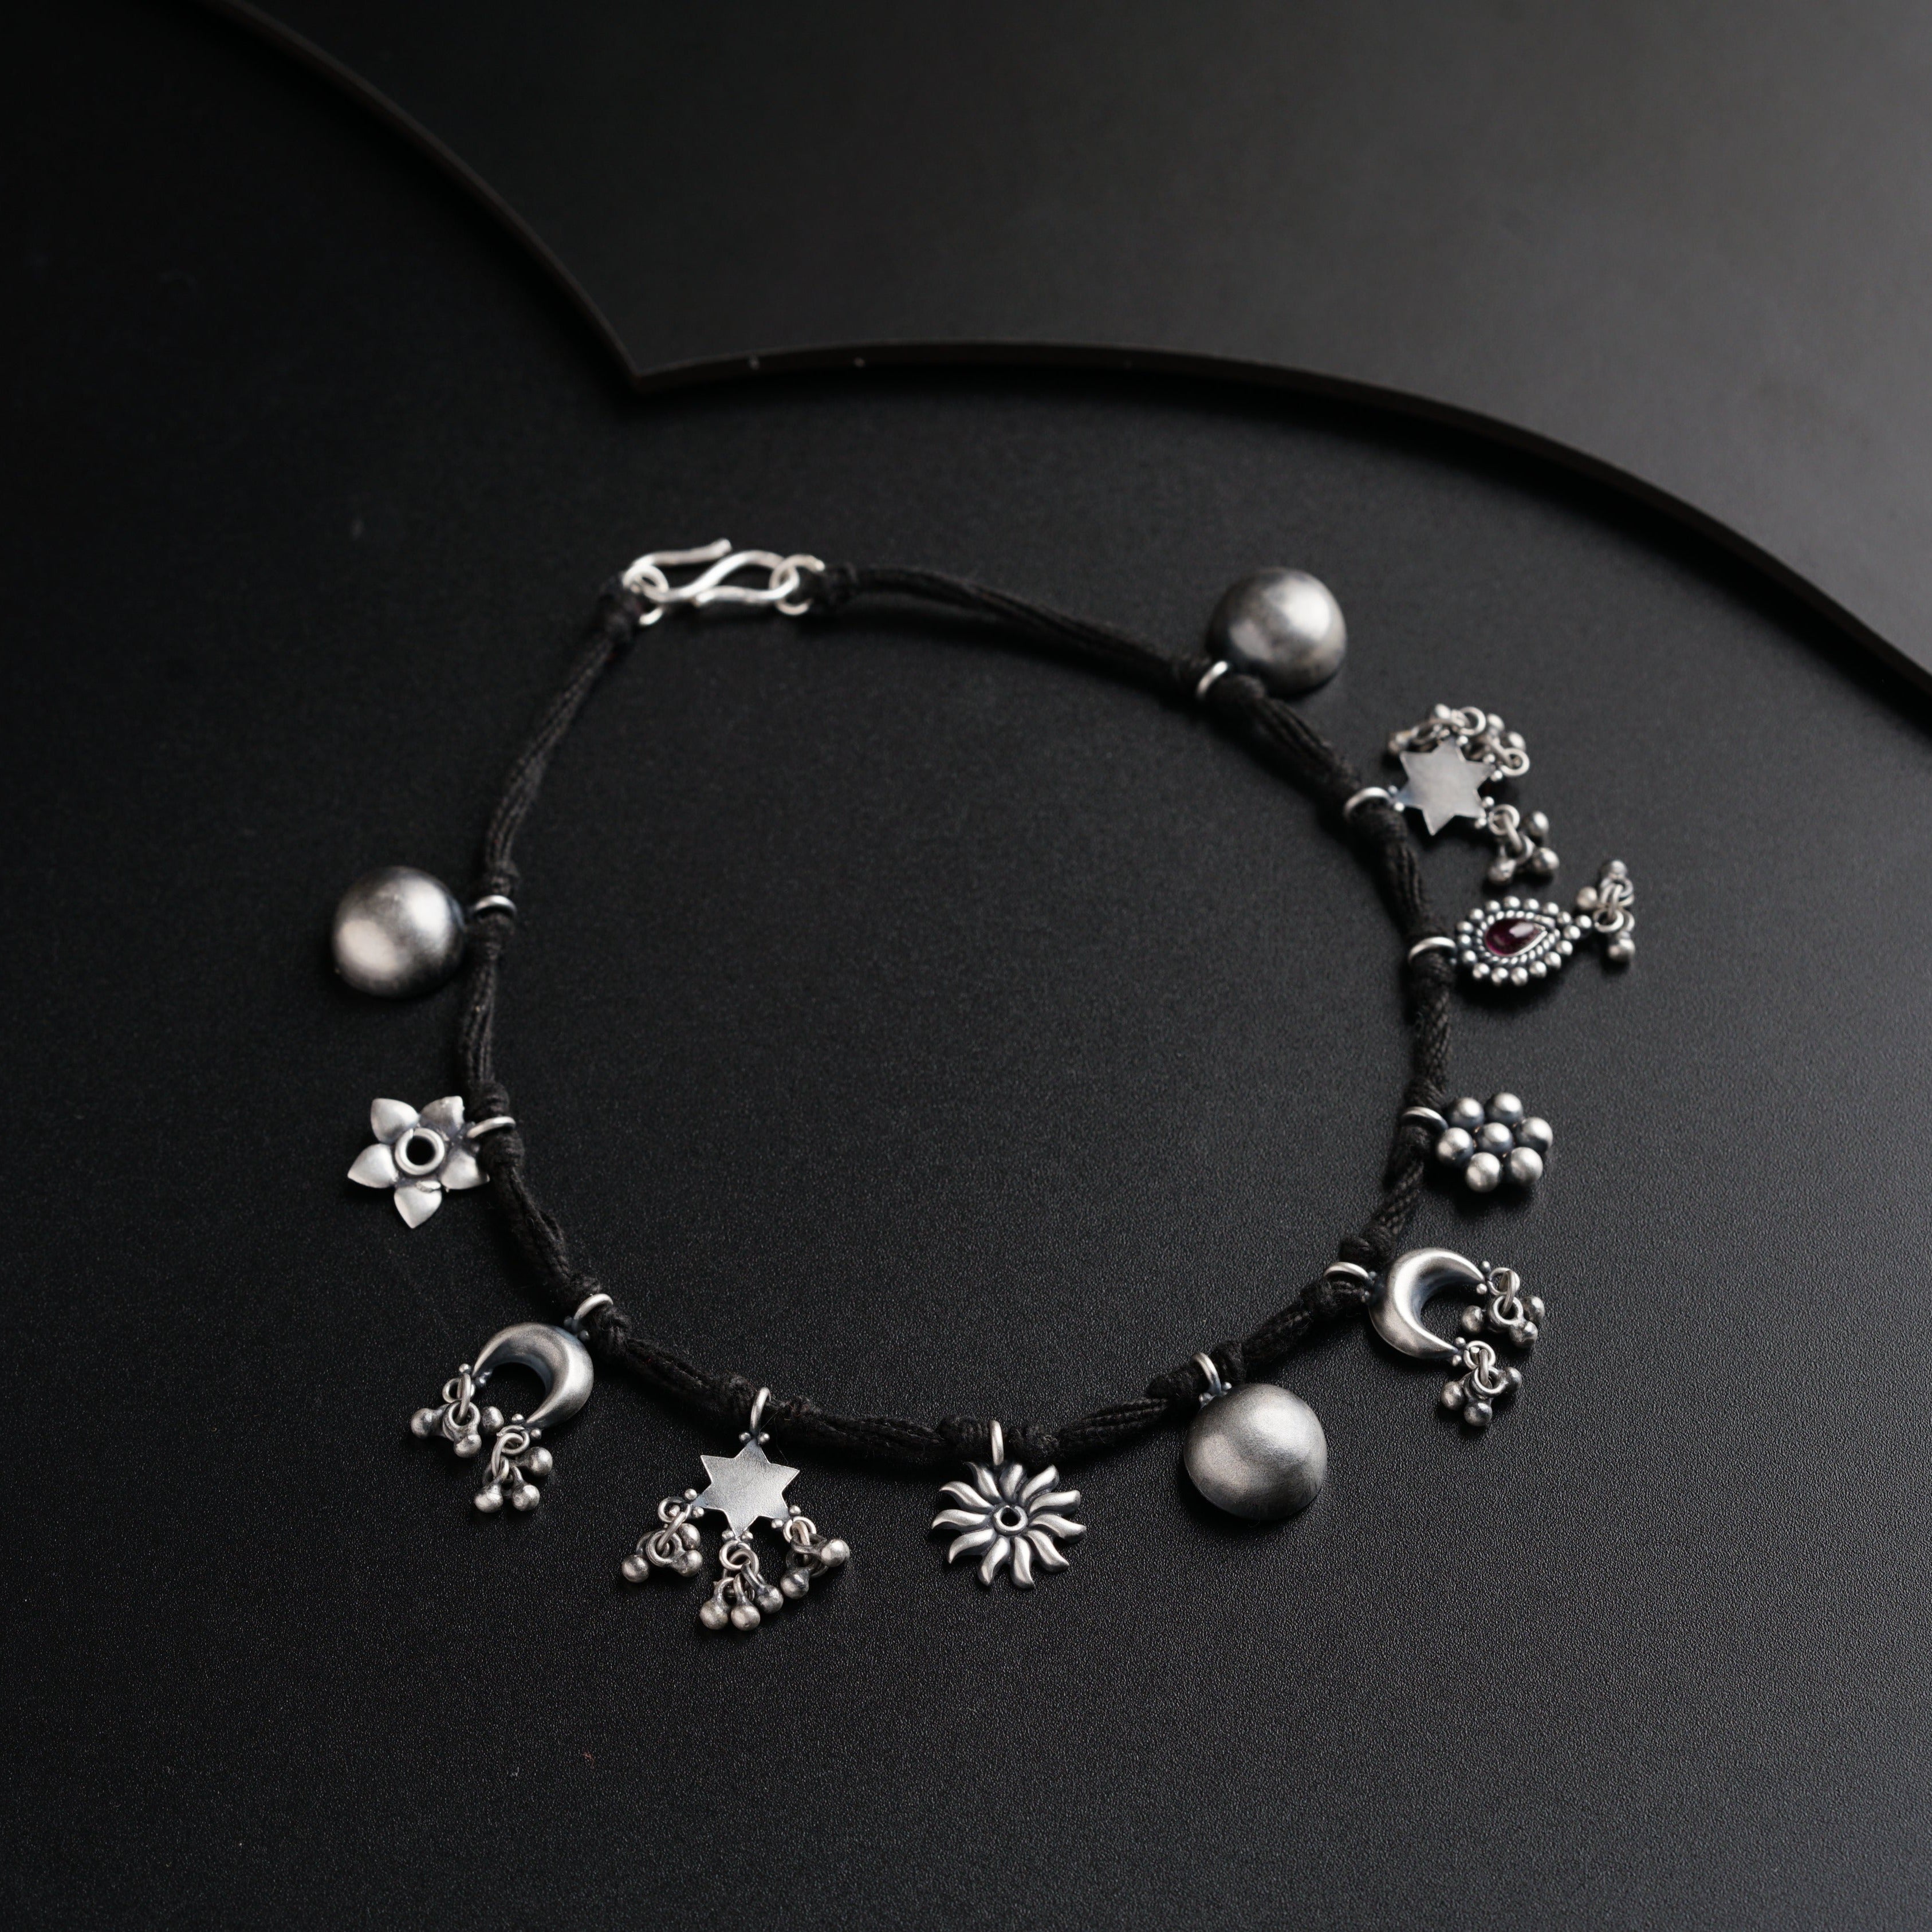 a black string bracelet with silver beads and flowers